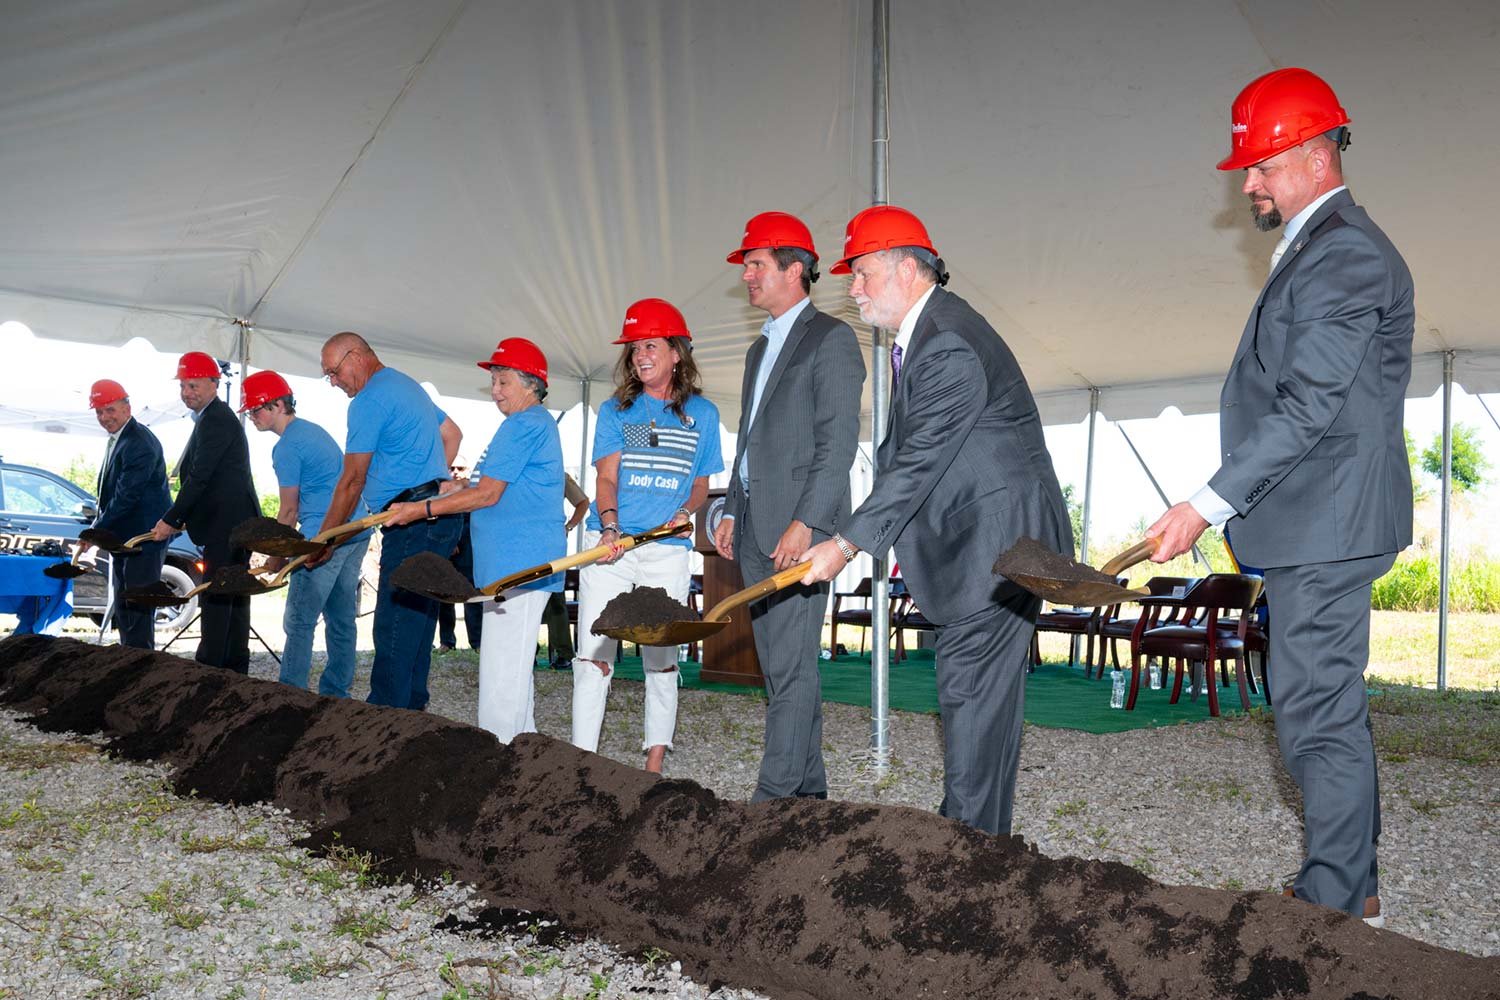  Using golden shovels, Gov. Andy Beshear, along with Jody Cash’s family and others, officially broke ground Monday morning. (Photo by Jim Robertson) 